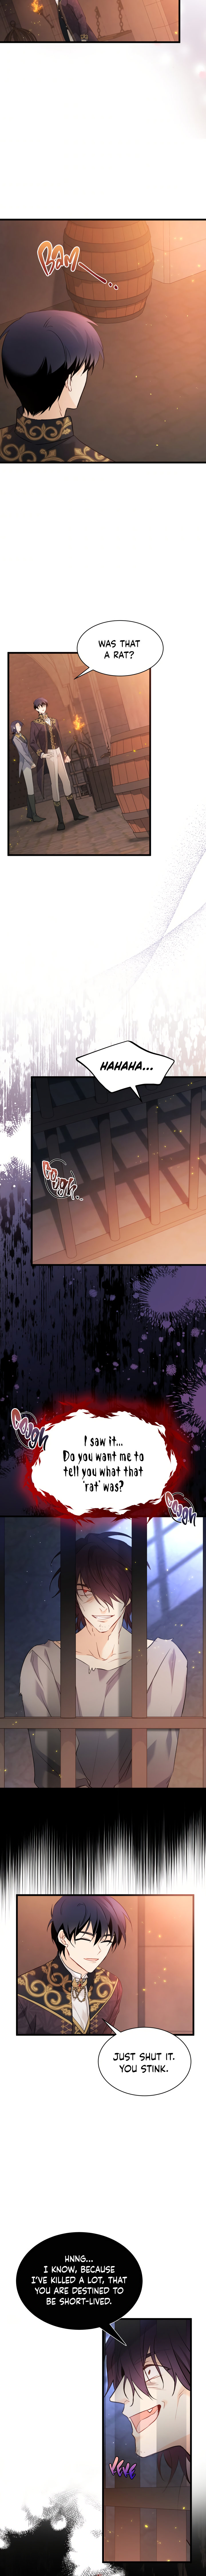 The Symbiotic Relationship Between A Rabbit and A Black Panther - Chapter 57 Page 11